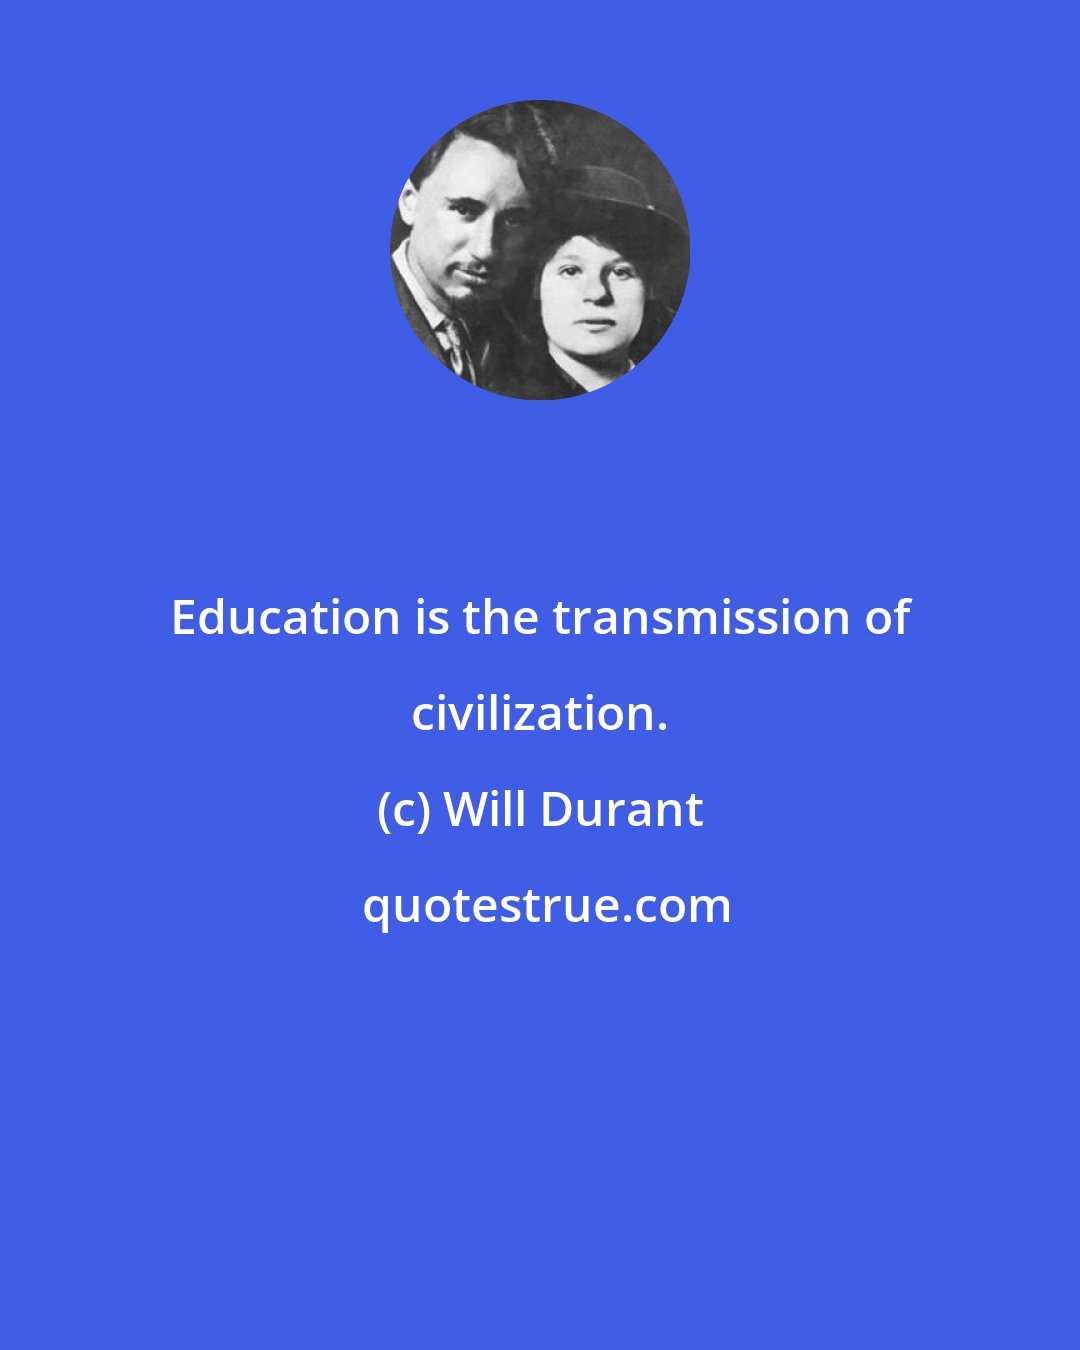 Will Durant: Education is the transmission of civilization.